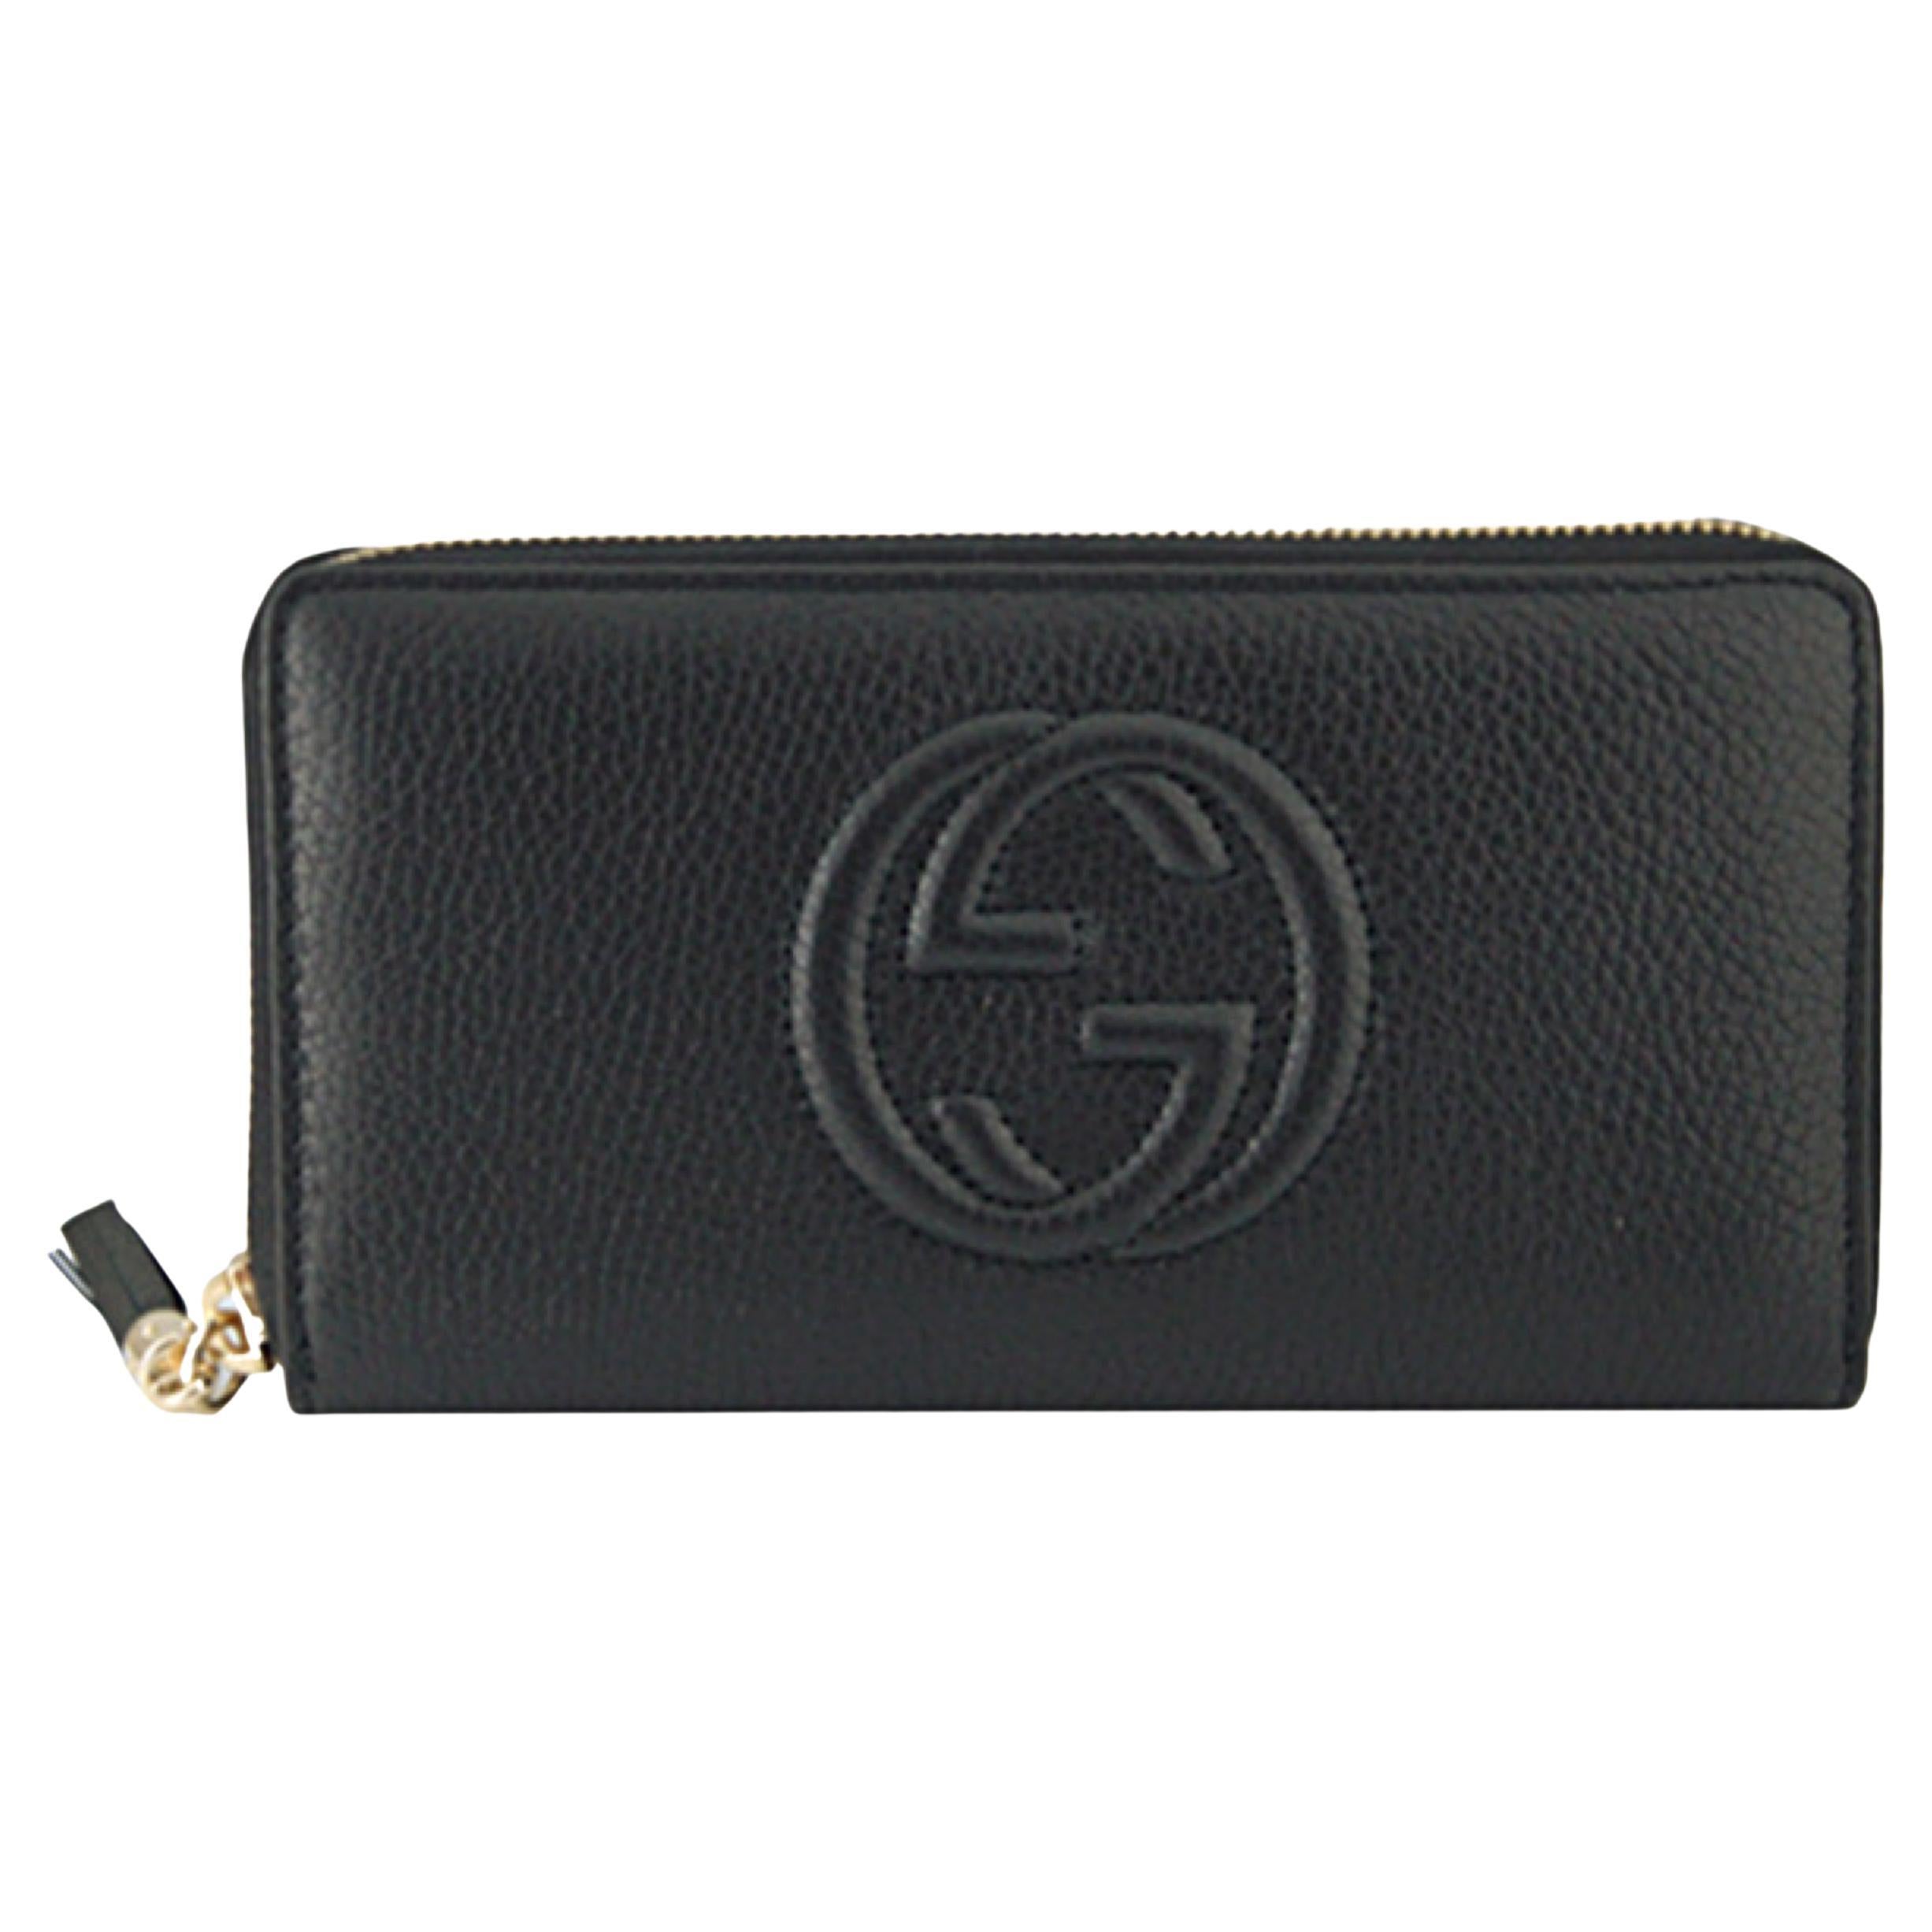 NEW Gucci Soho Black Leather Zip Around Leather Long Wallet Clutch Bag For Sale